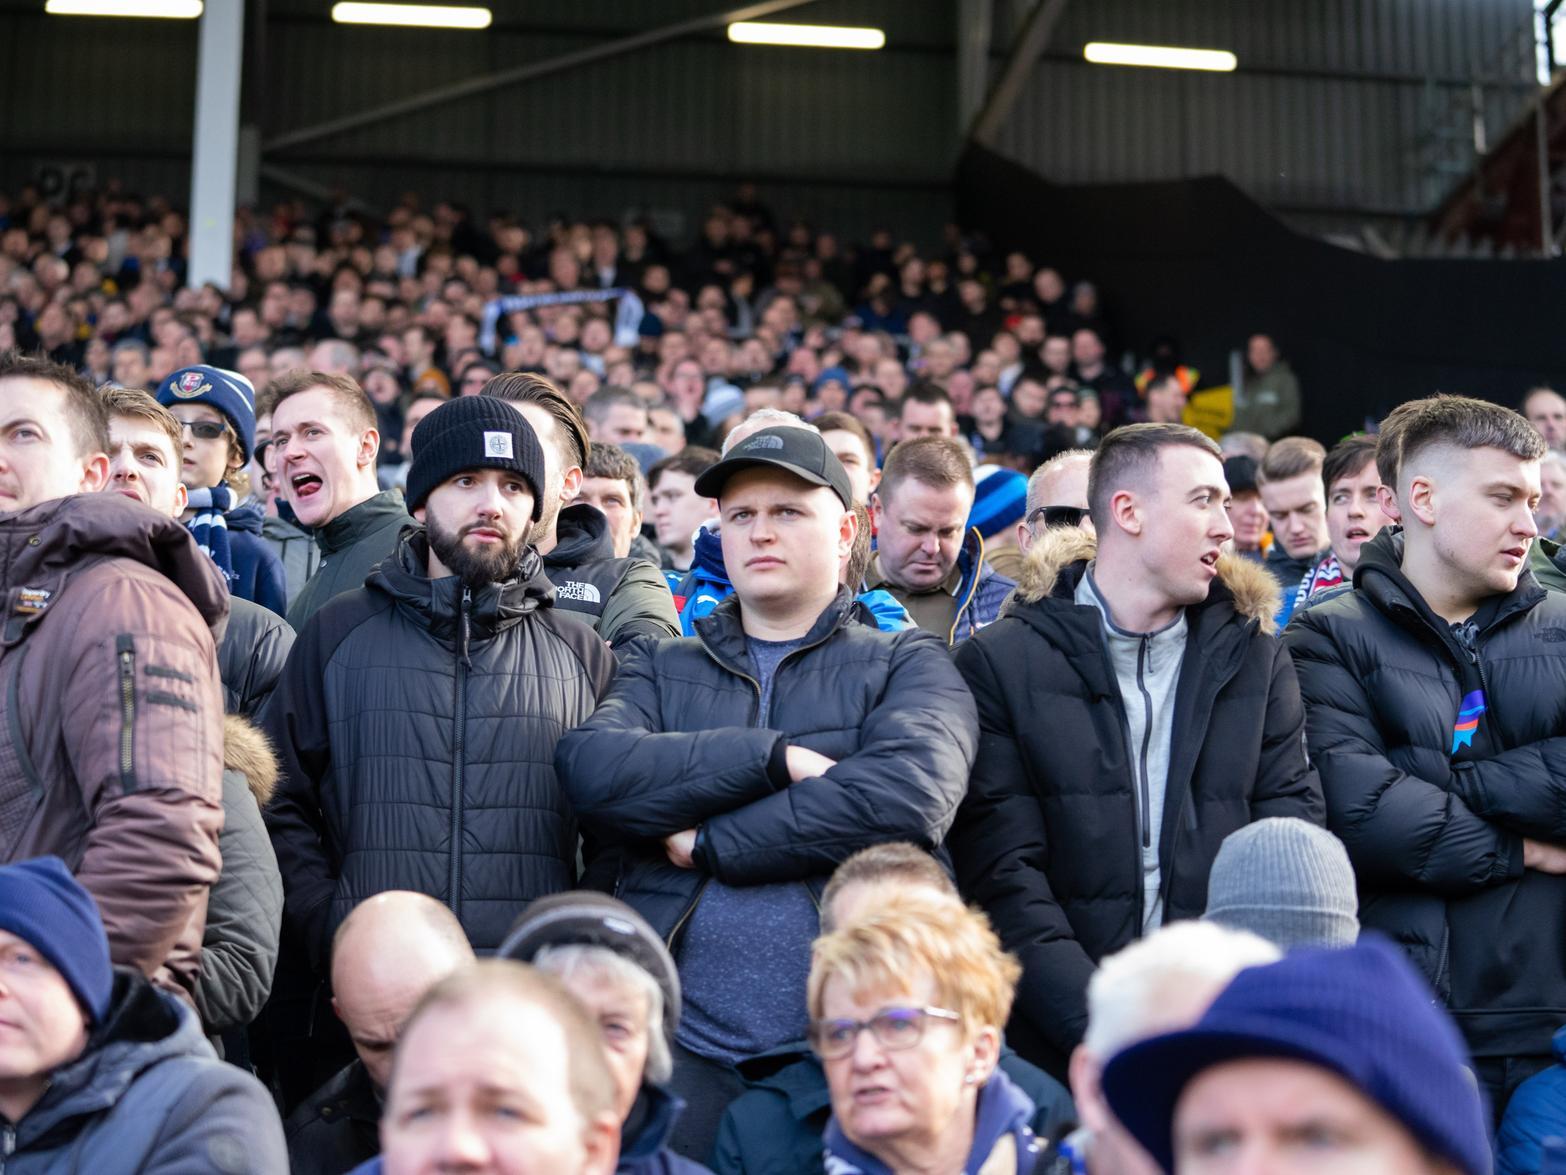 Some stern faced Preston fans watch on, as Fulham host PNE.